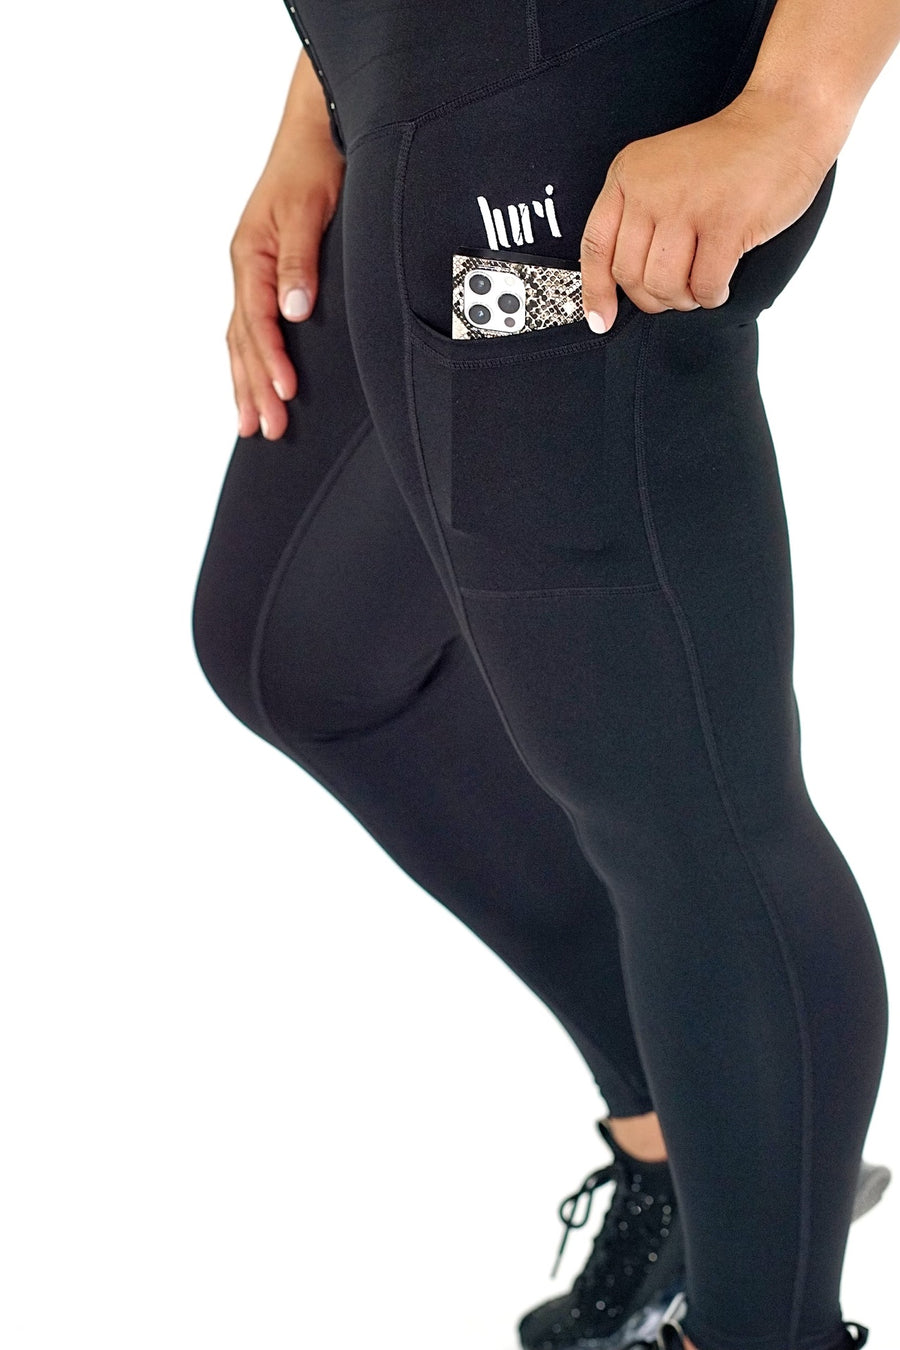 "Luxe" High Waisted Compression Leggings - Luri post surgical garments